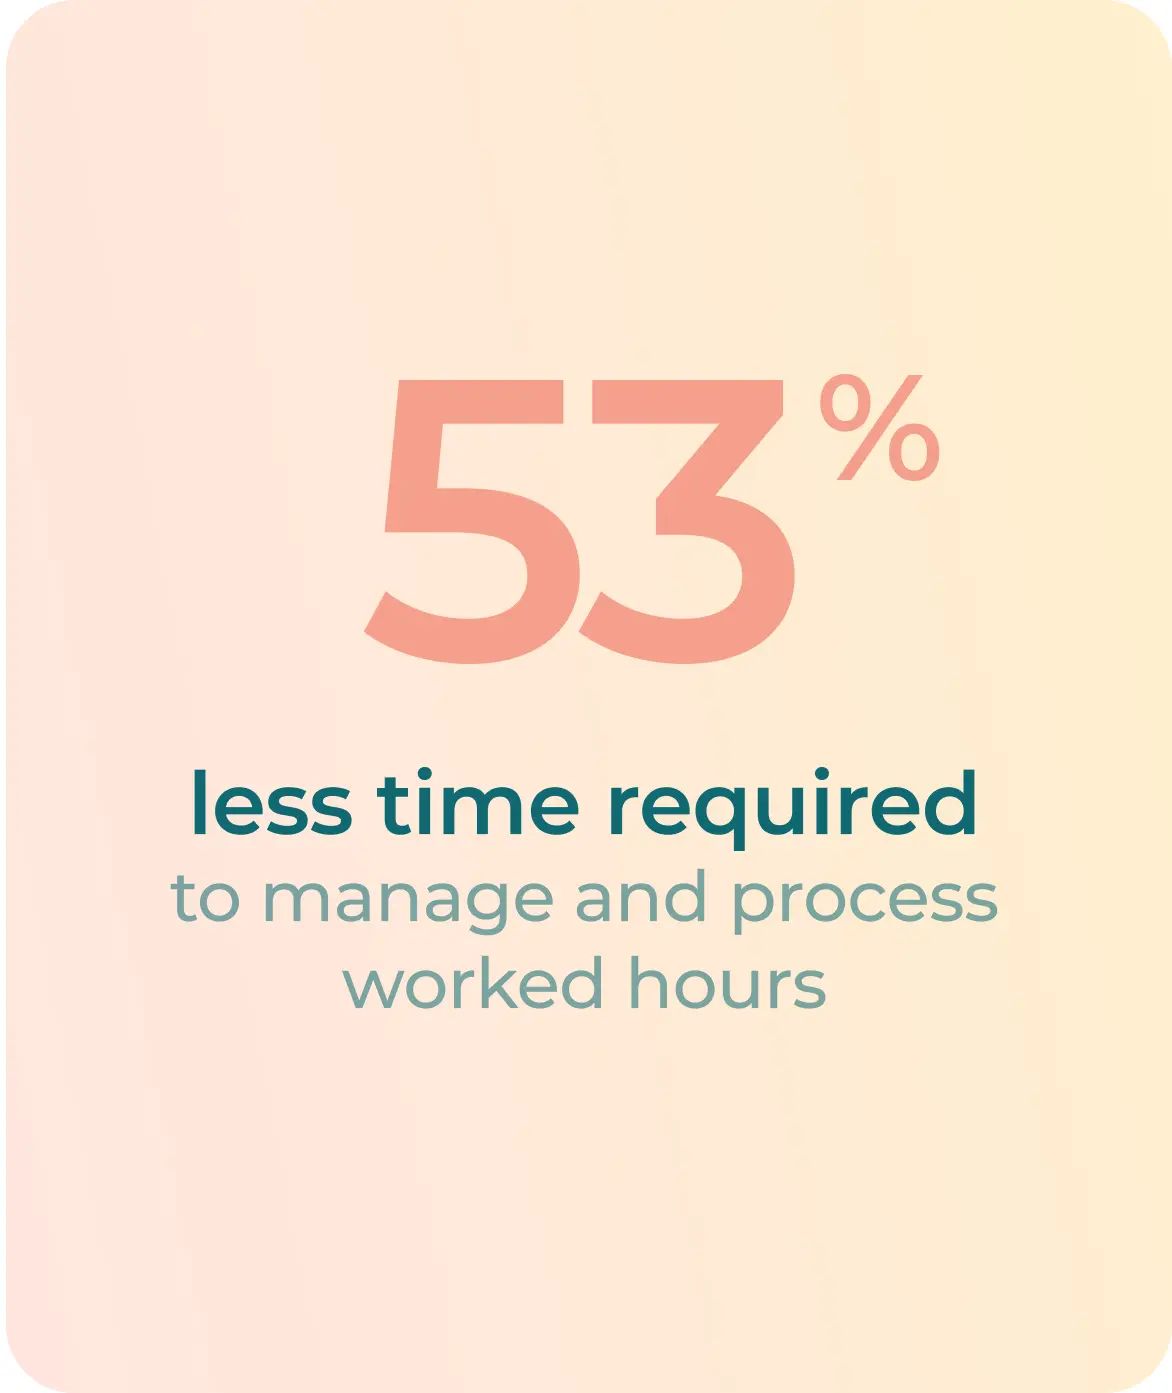 Agendrix statistic from a customer survey: 53% time saved in managing and processing hours worked. 